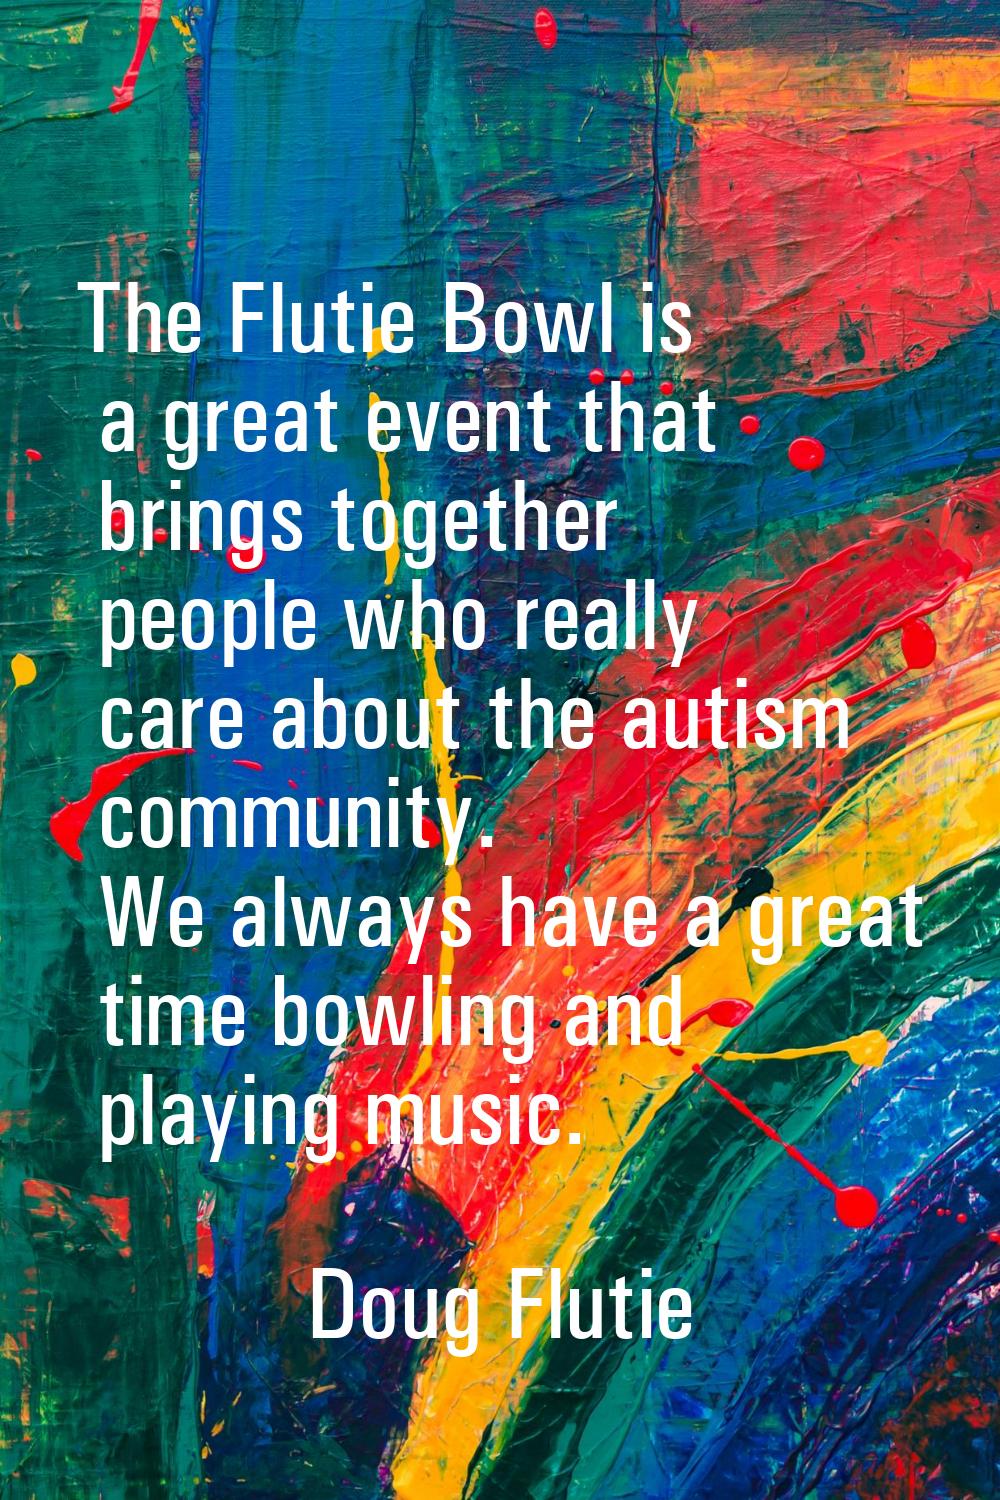 The Flutie Bowl is a great event that brings together people who really care about the autism commu